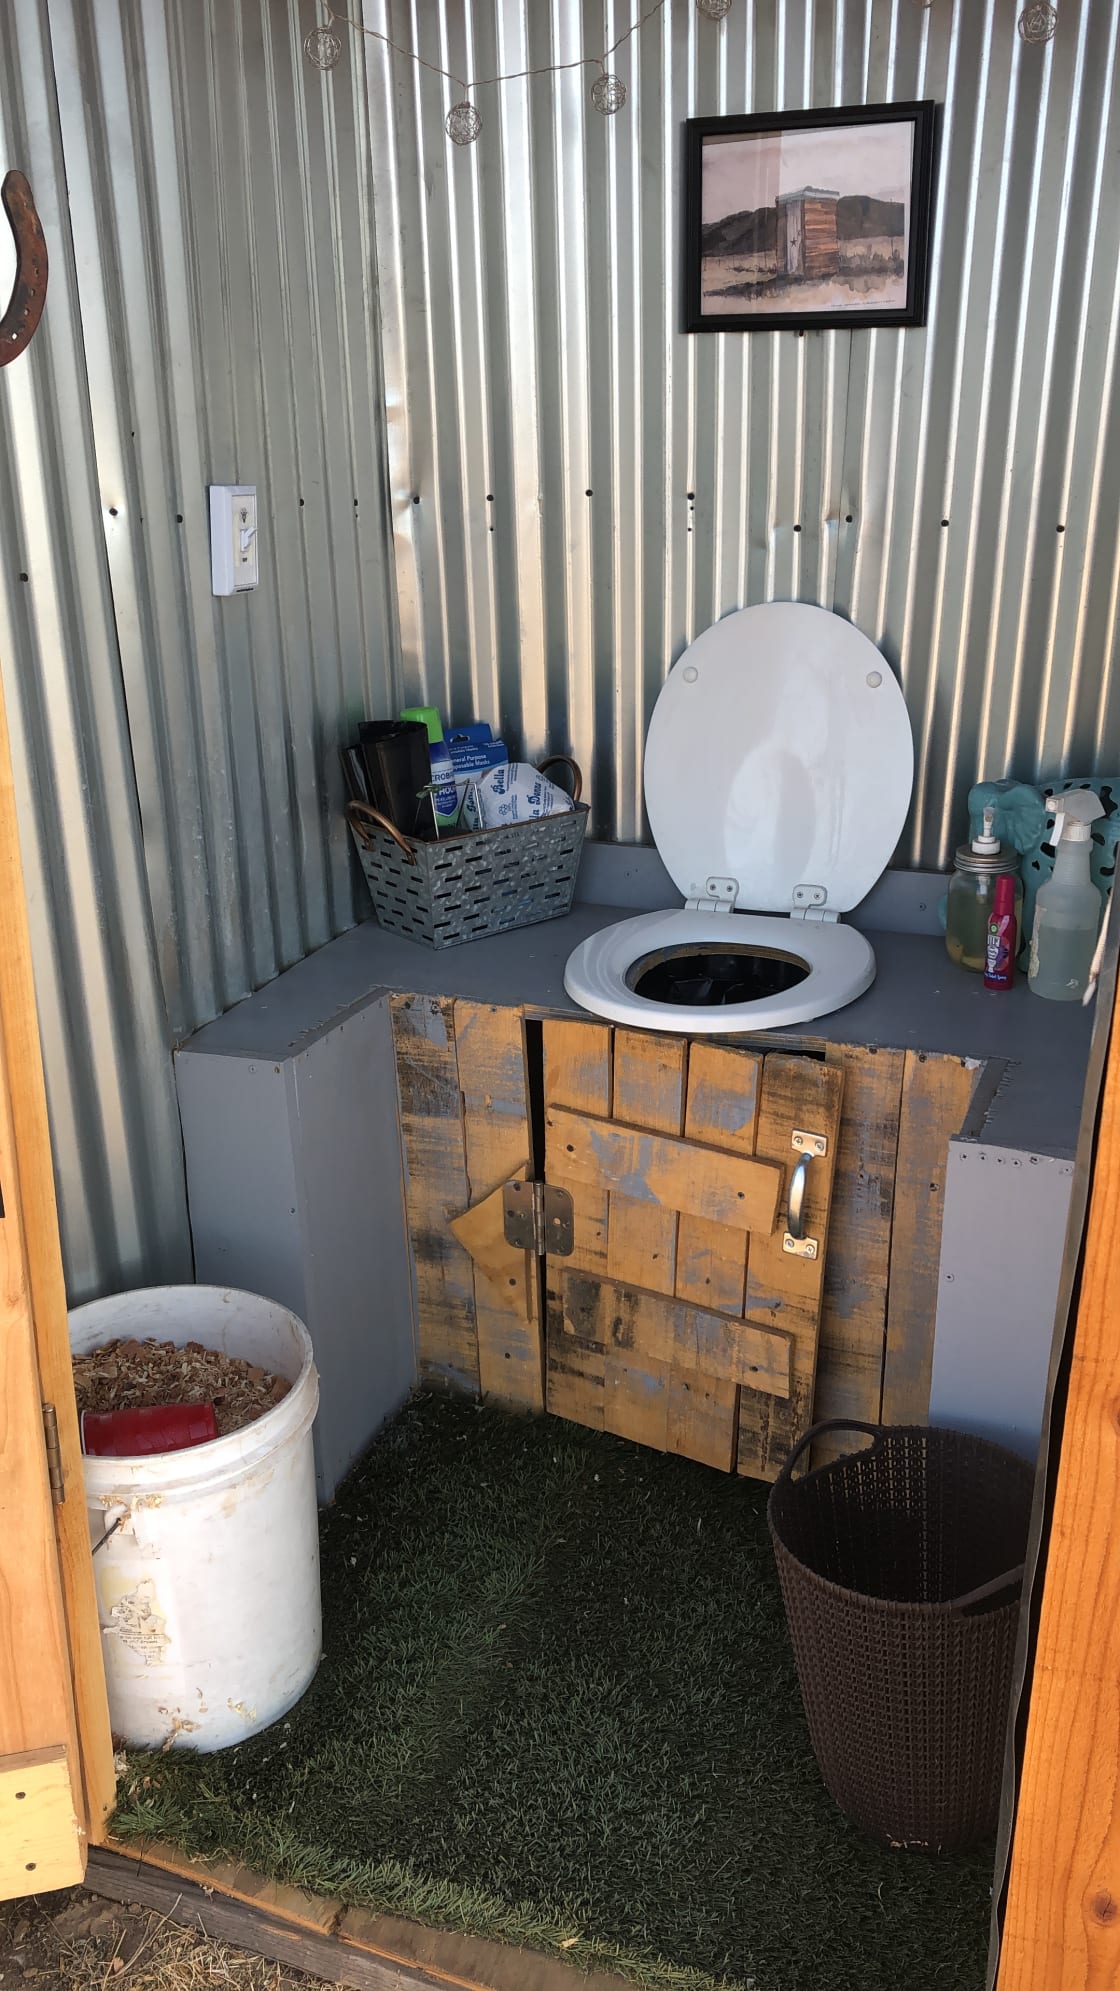 Outhouse - clean & tidy non-flushable toilet